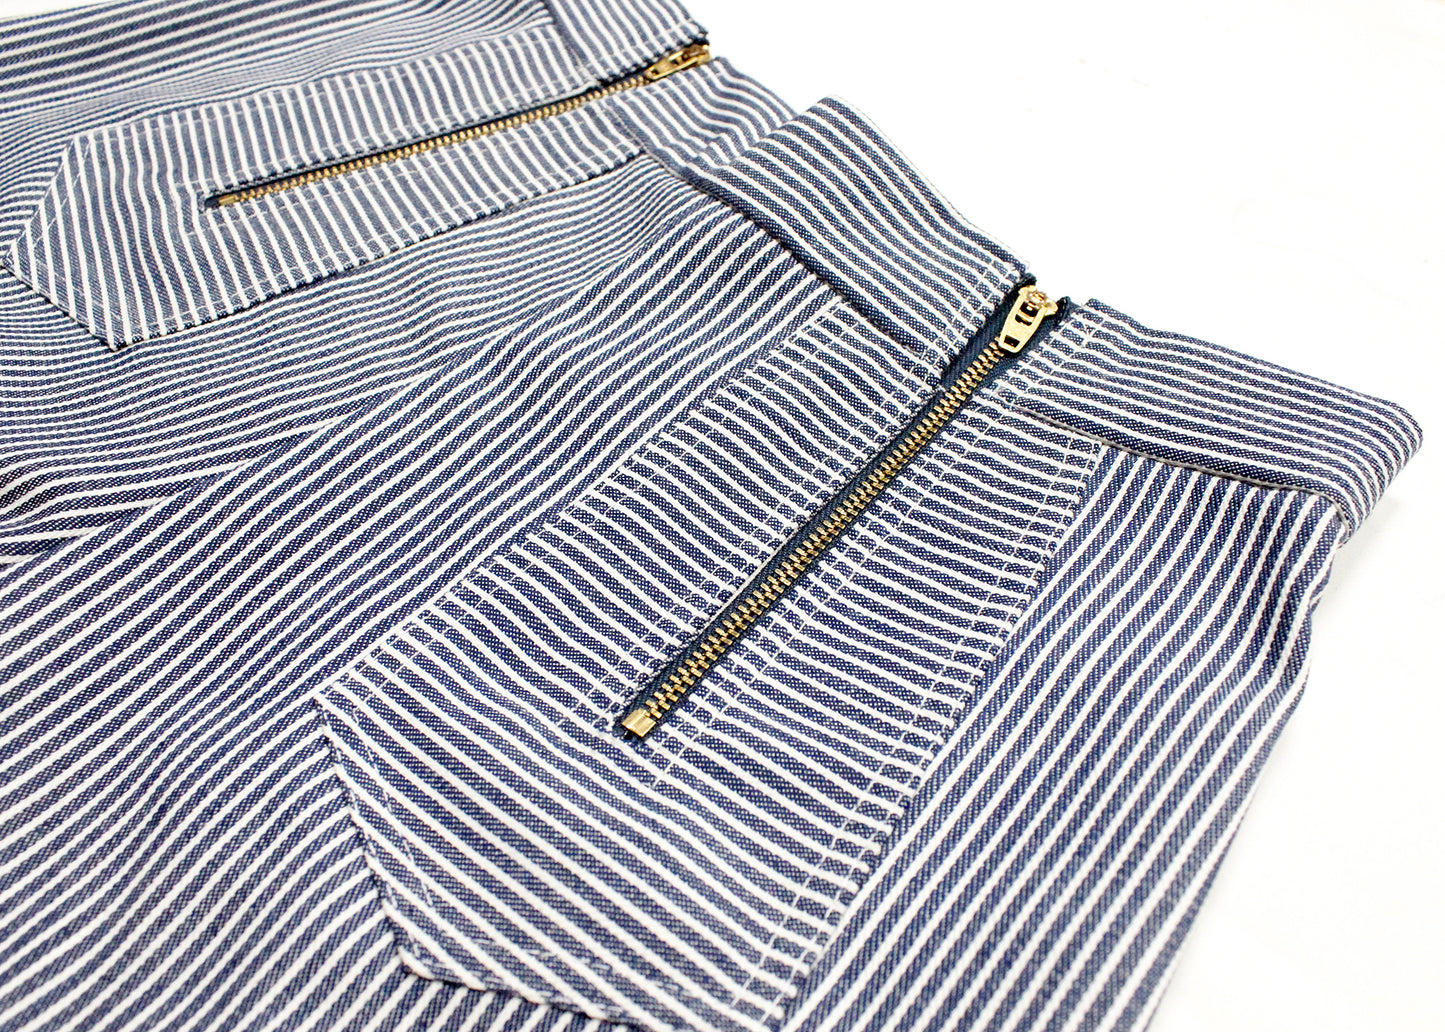 Nemes Shorts in Conductor Stripe